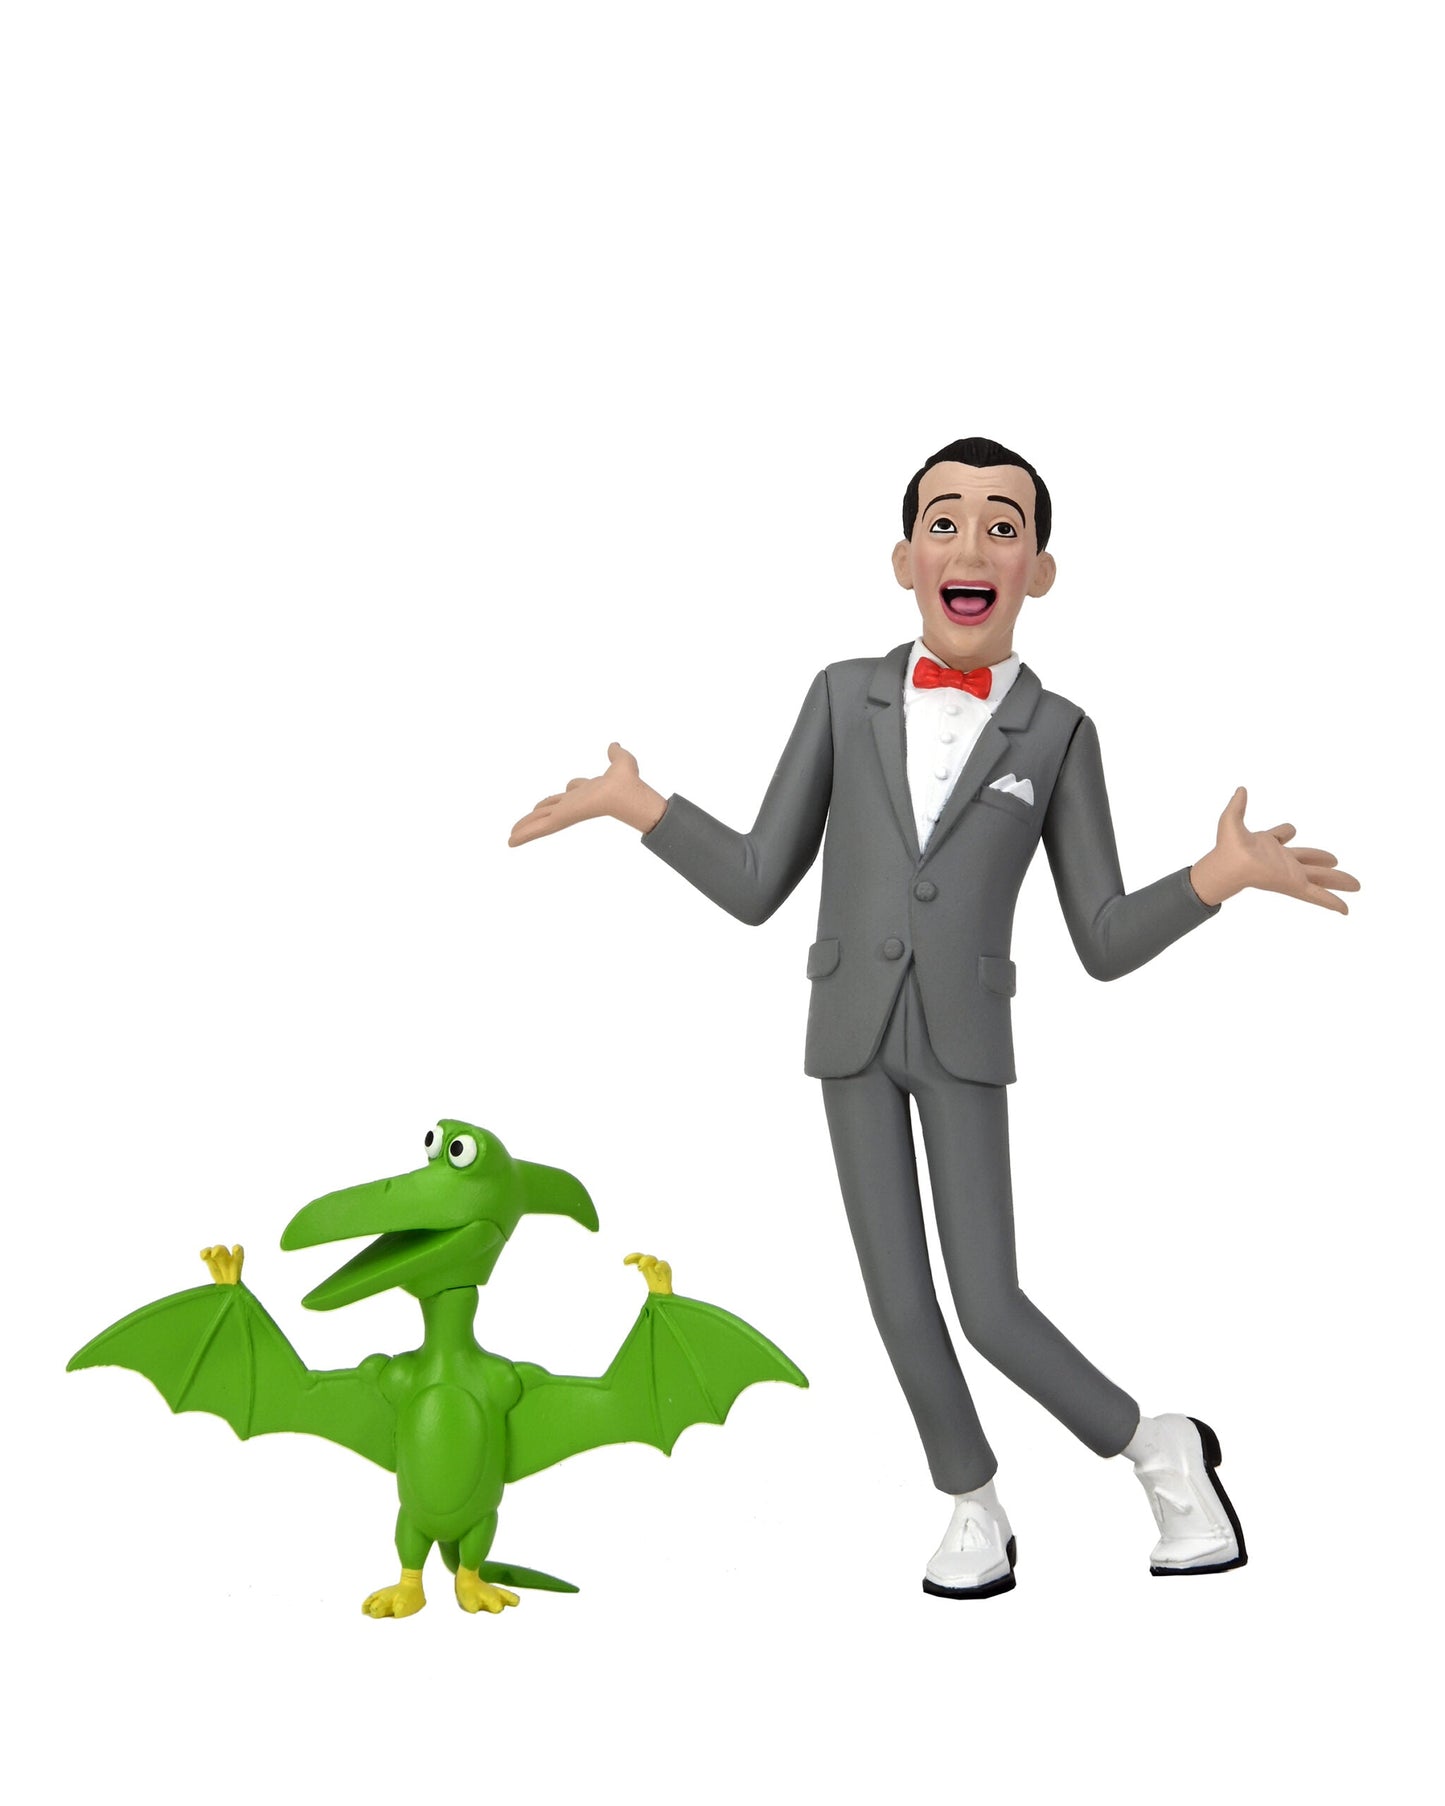 NECA Pee-wee’s Playhouse 6” Scale Action Figure – Pee-wee and Pterri